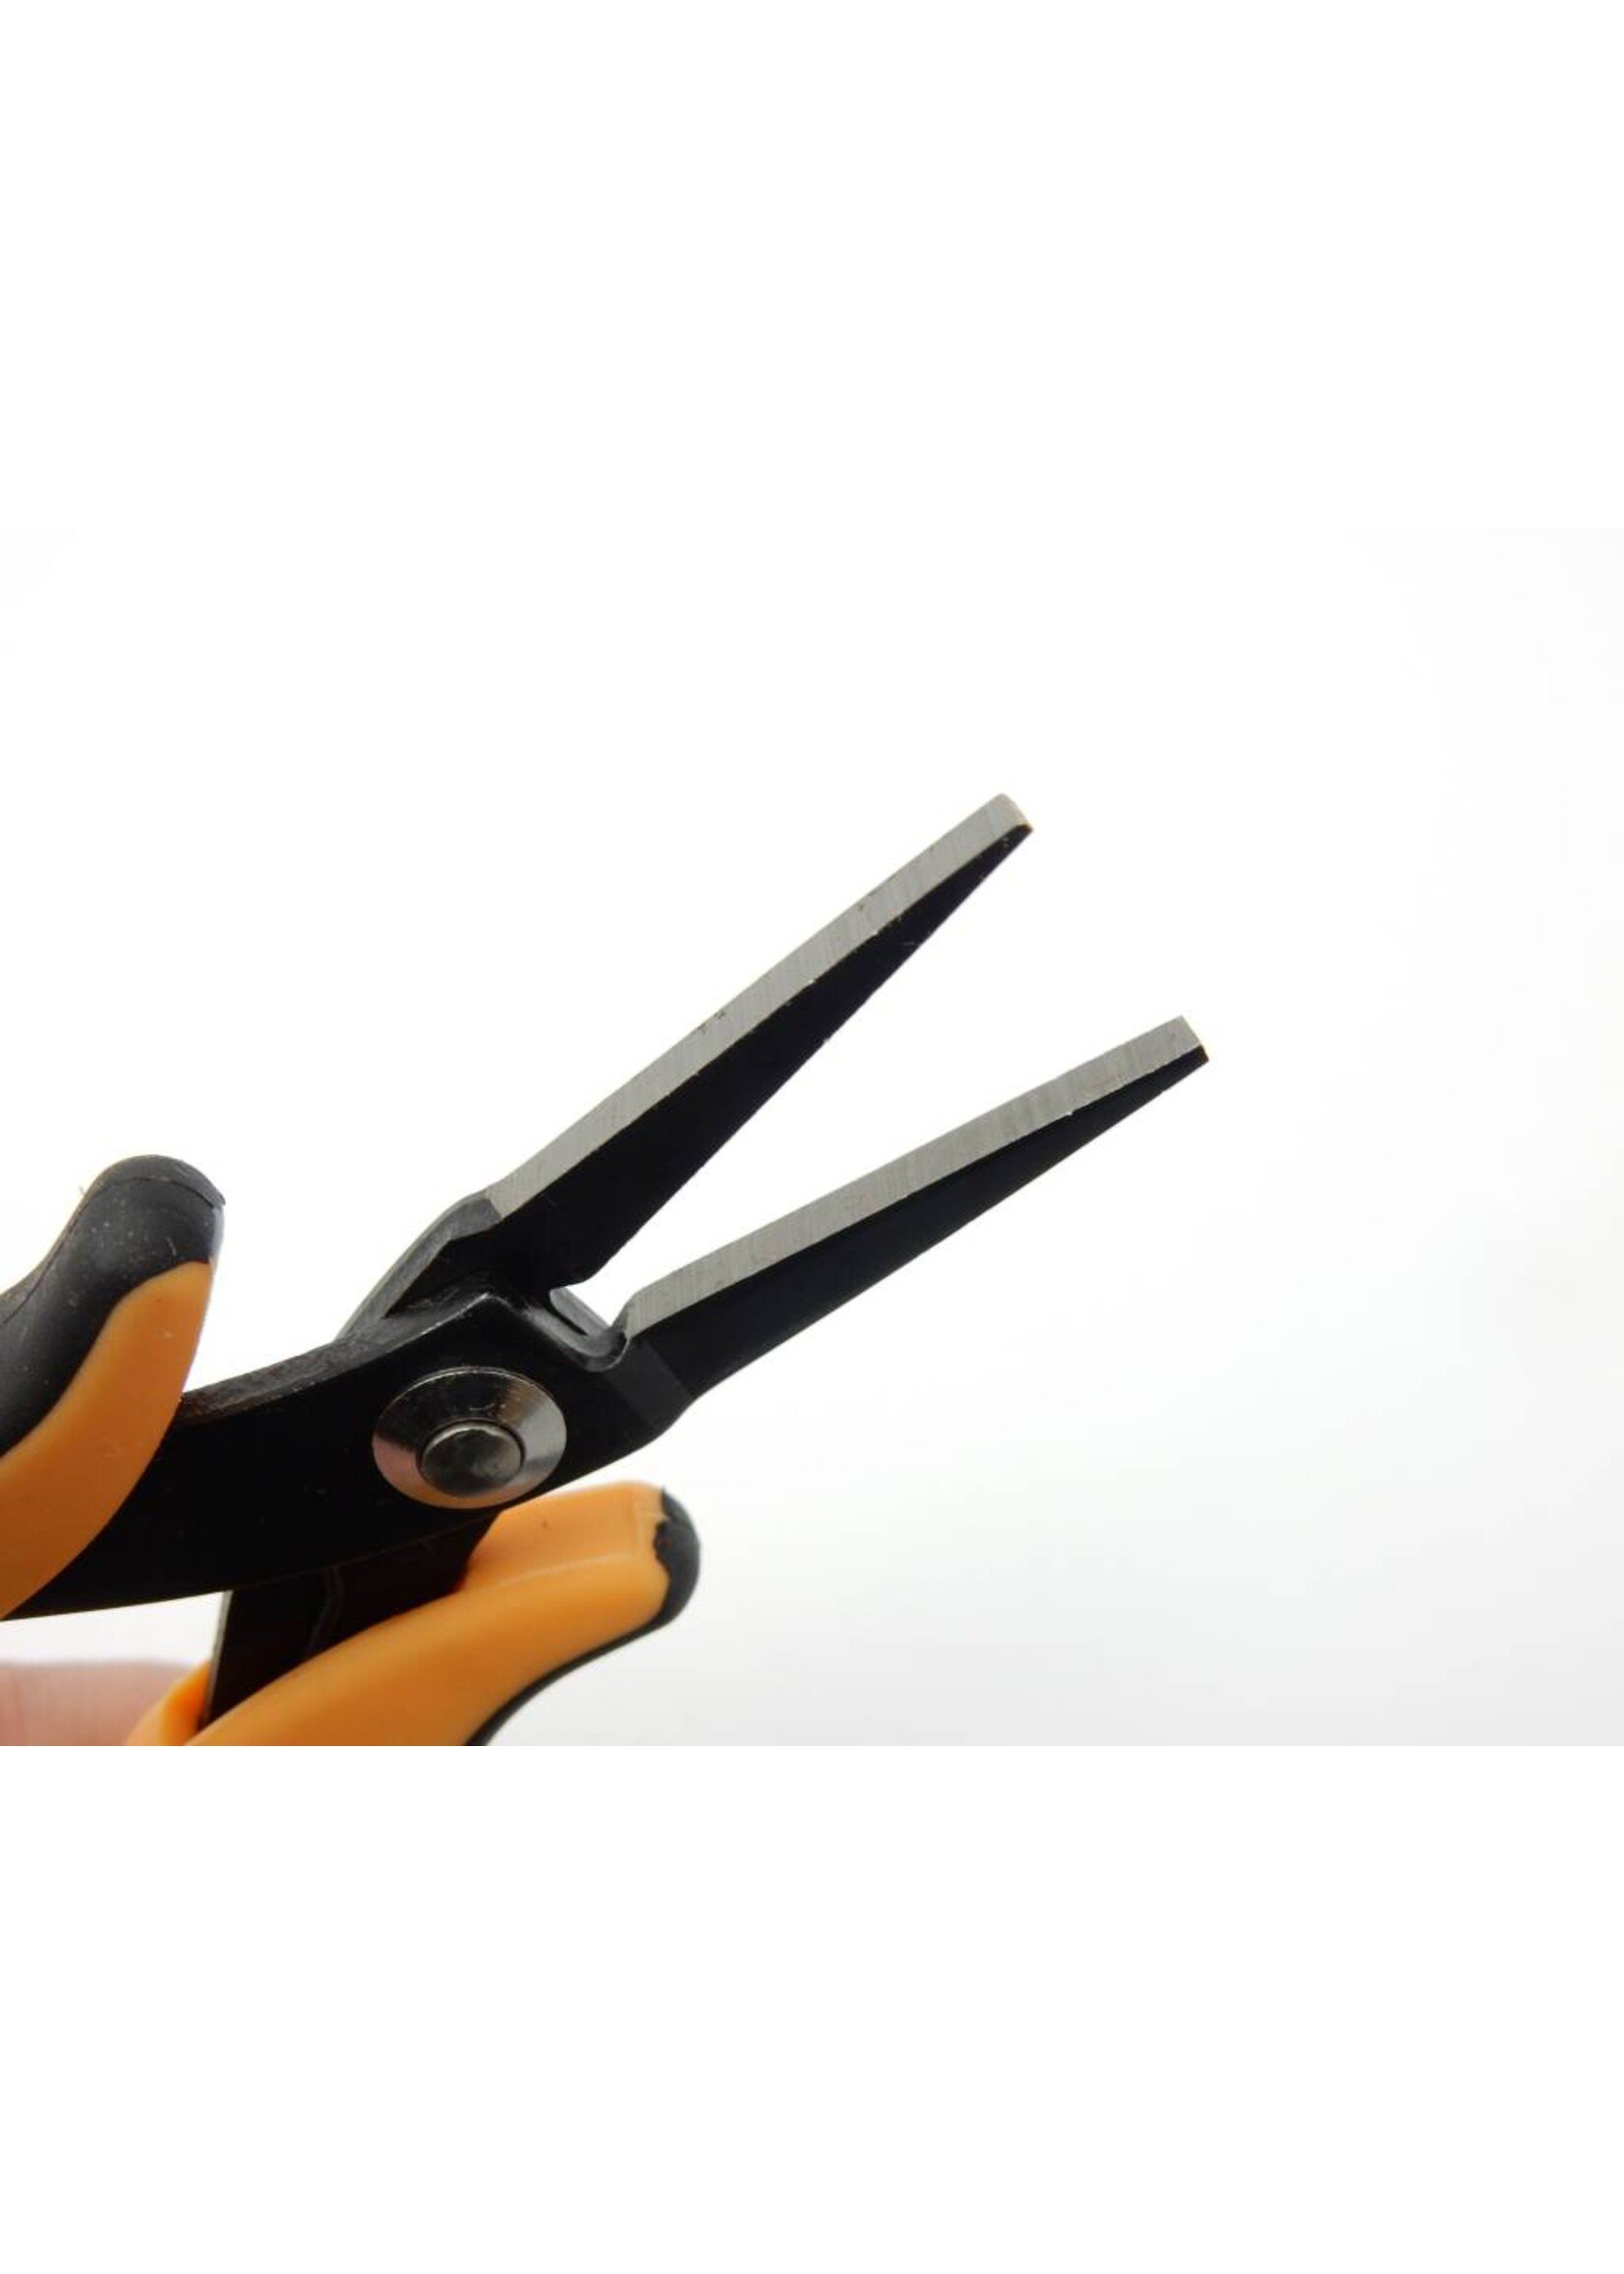 Needle nose pliers straight fine flat tips